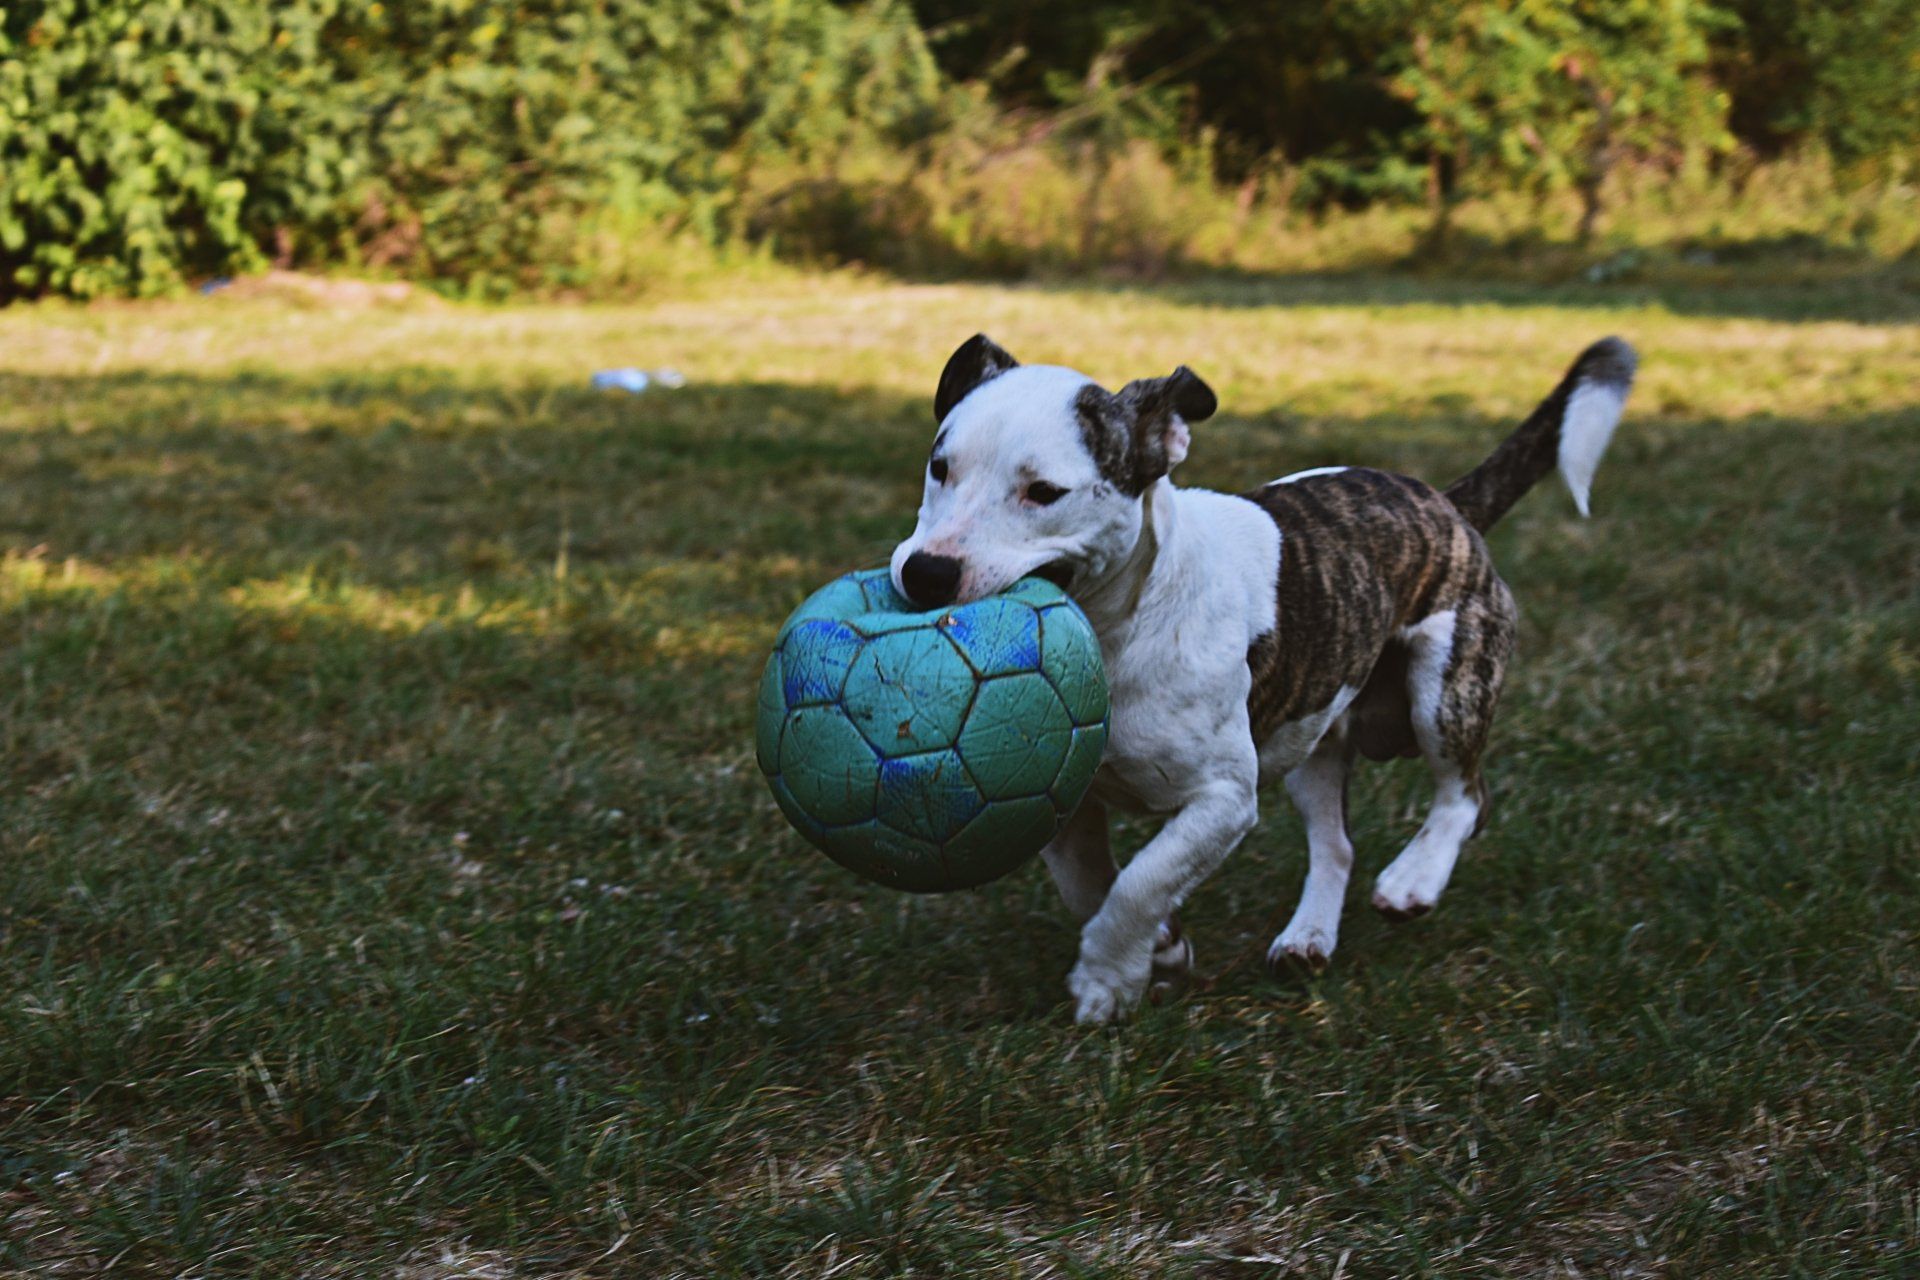 Dog playing outside with soccer ball 